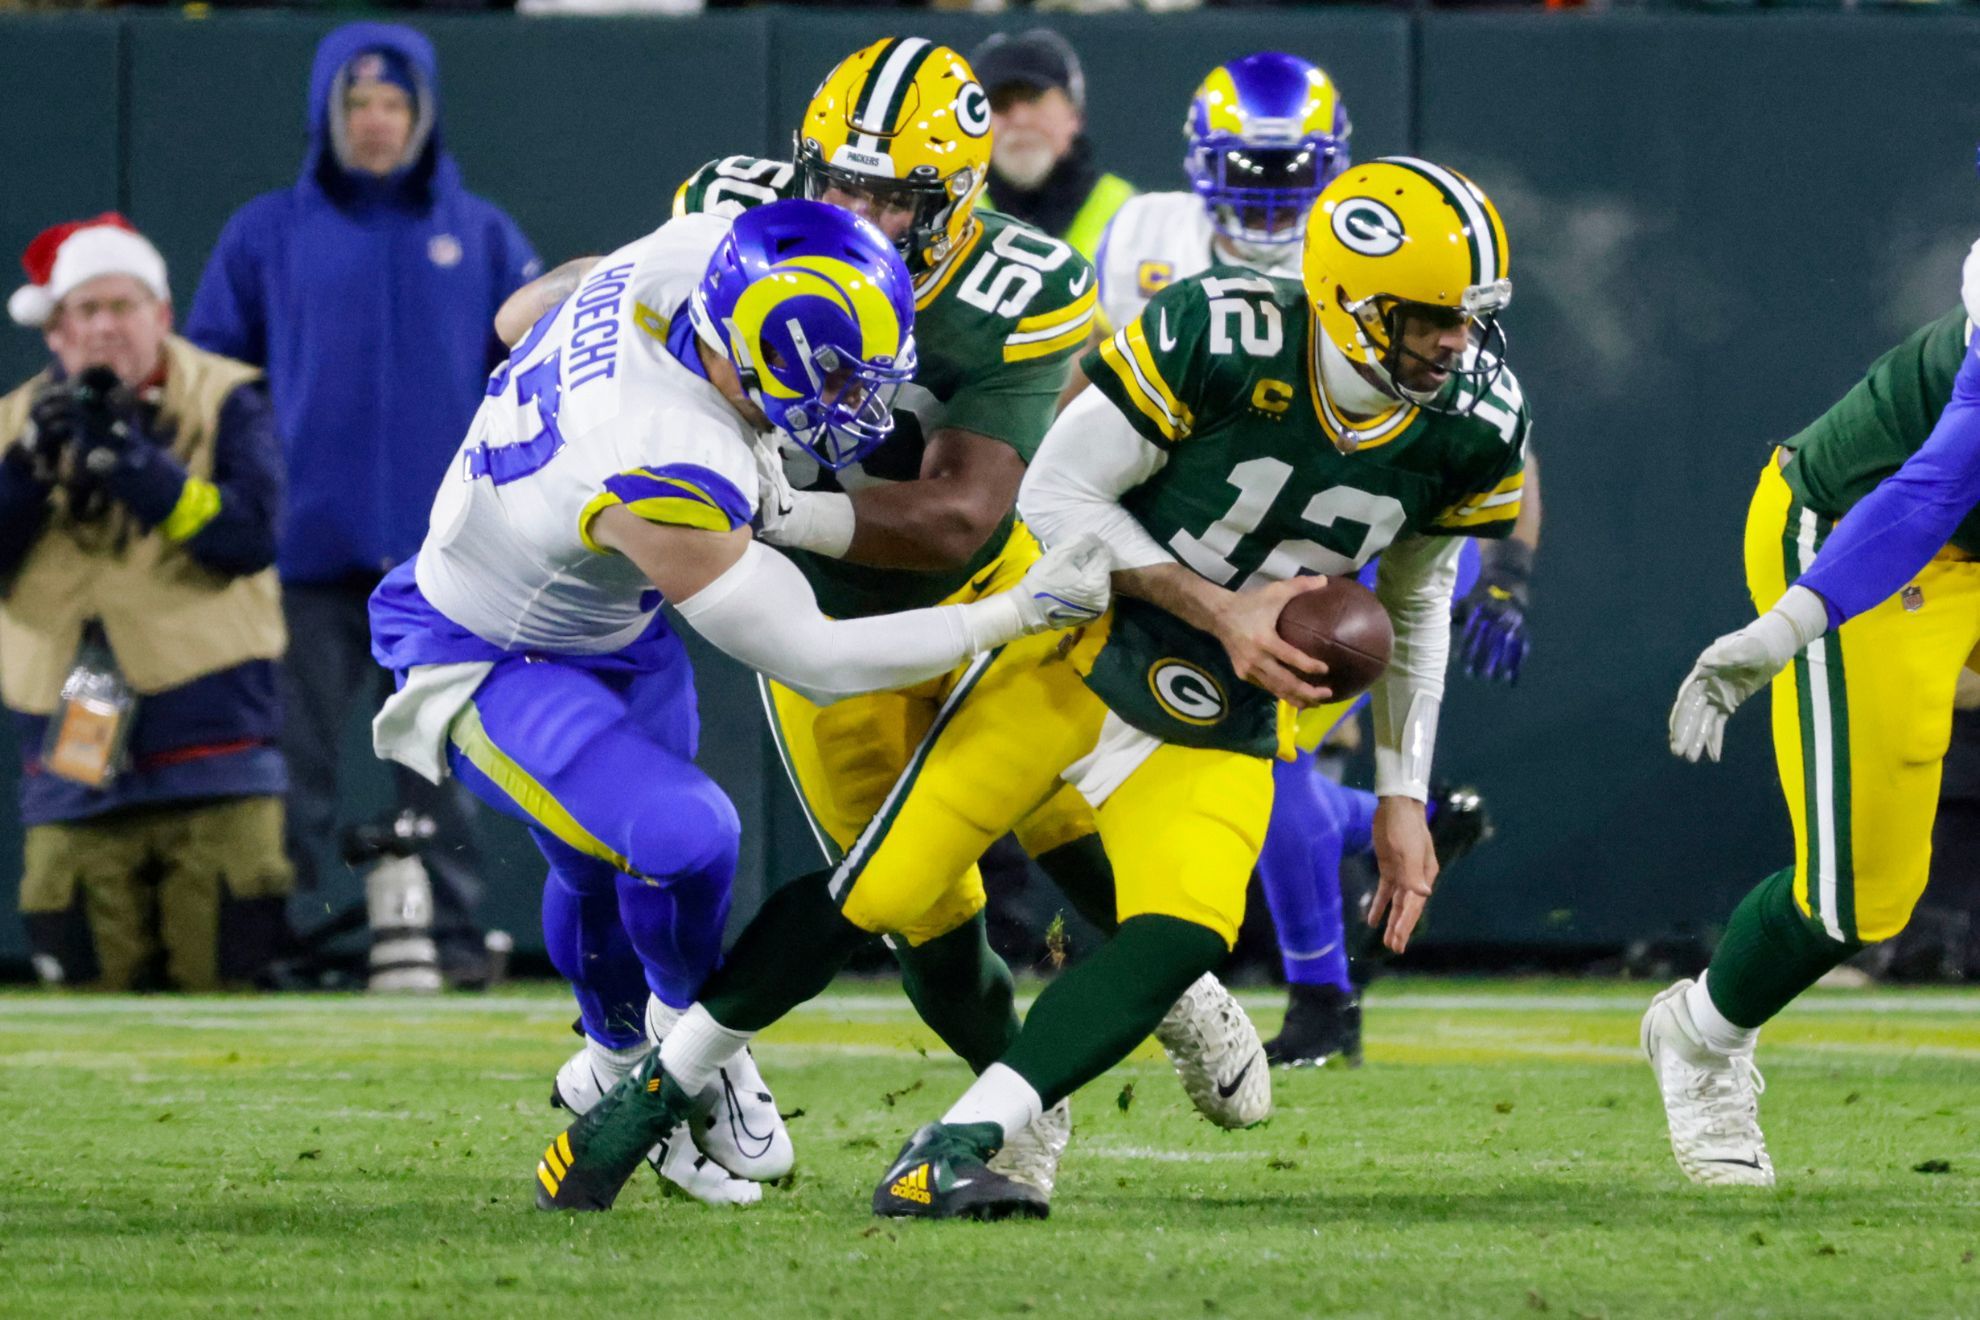 Rams - Packers: Final score, full highlights and play-by-play